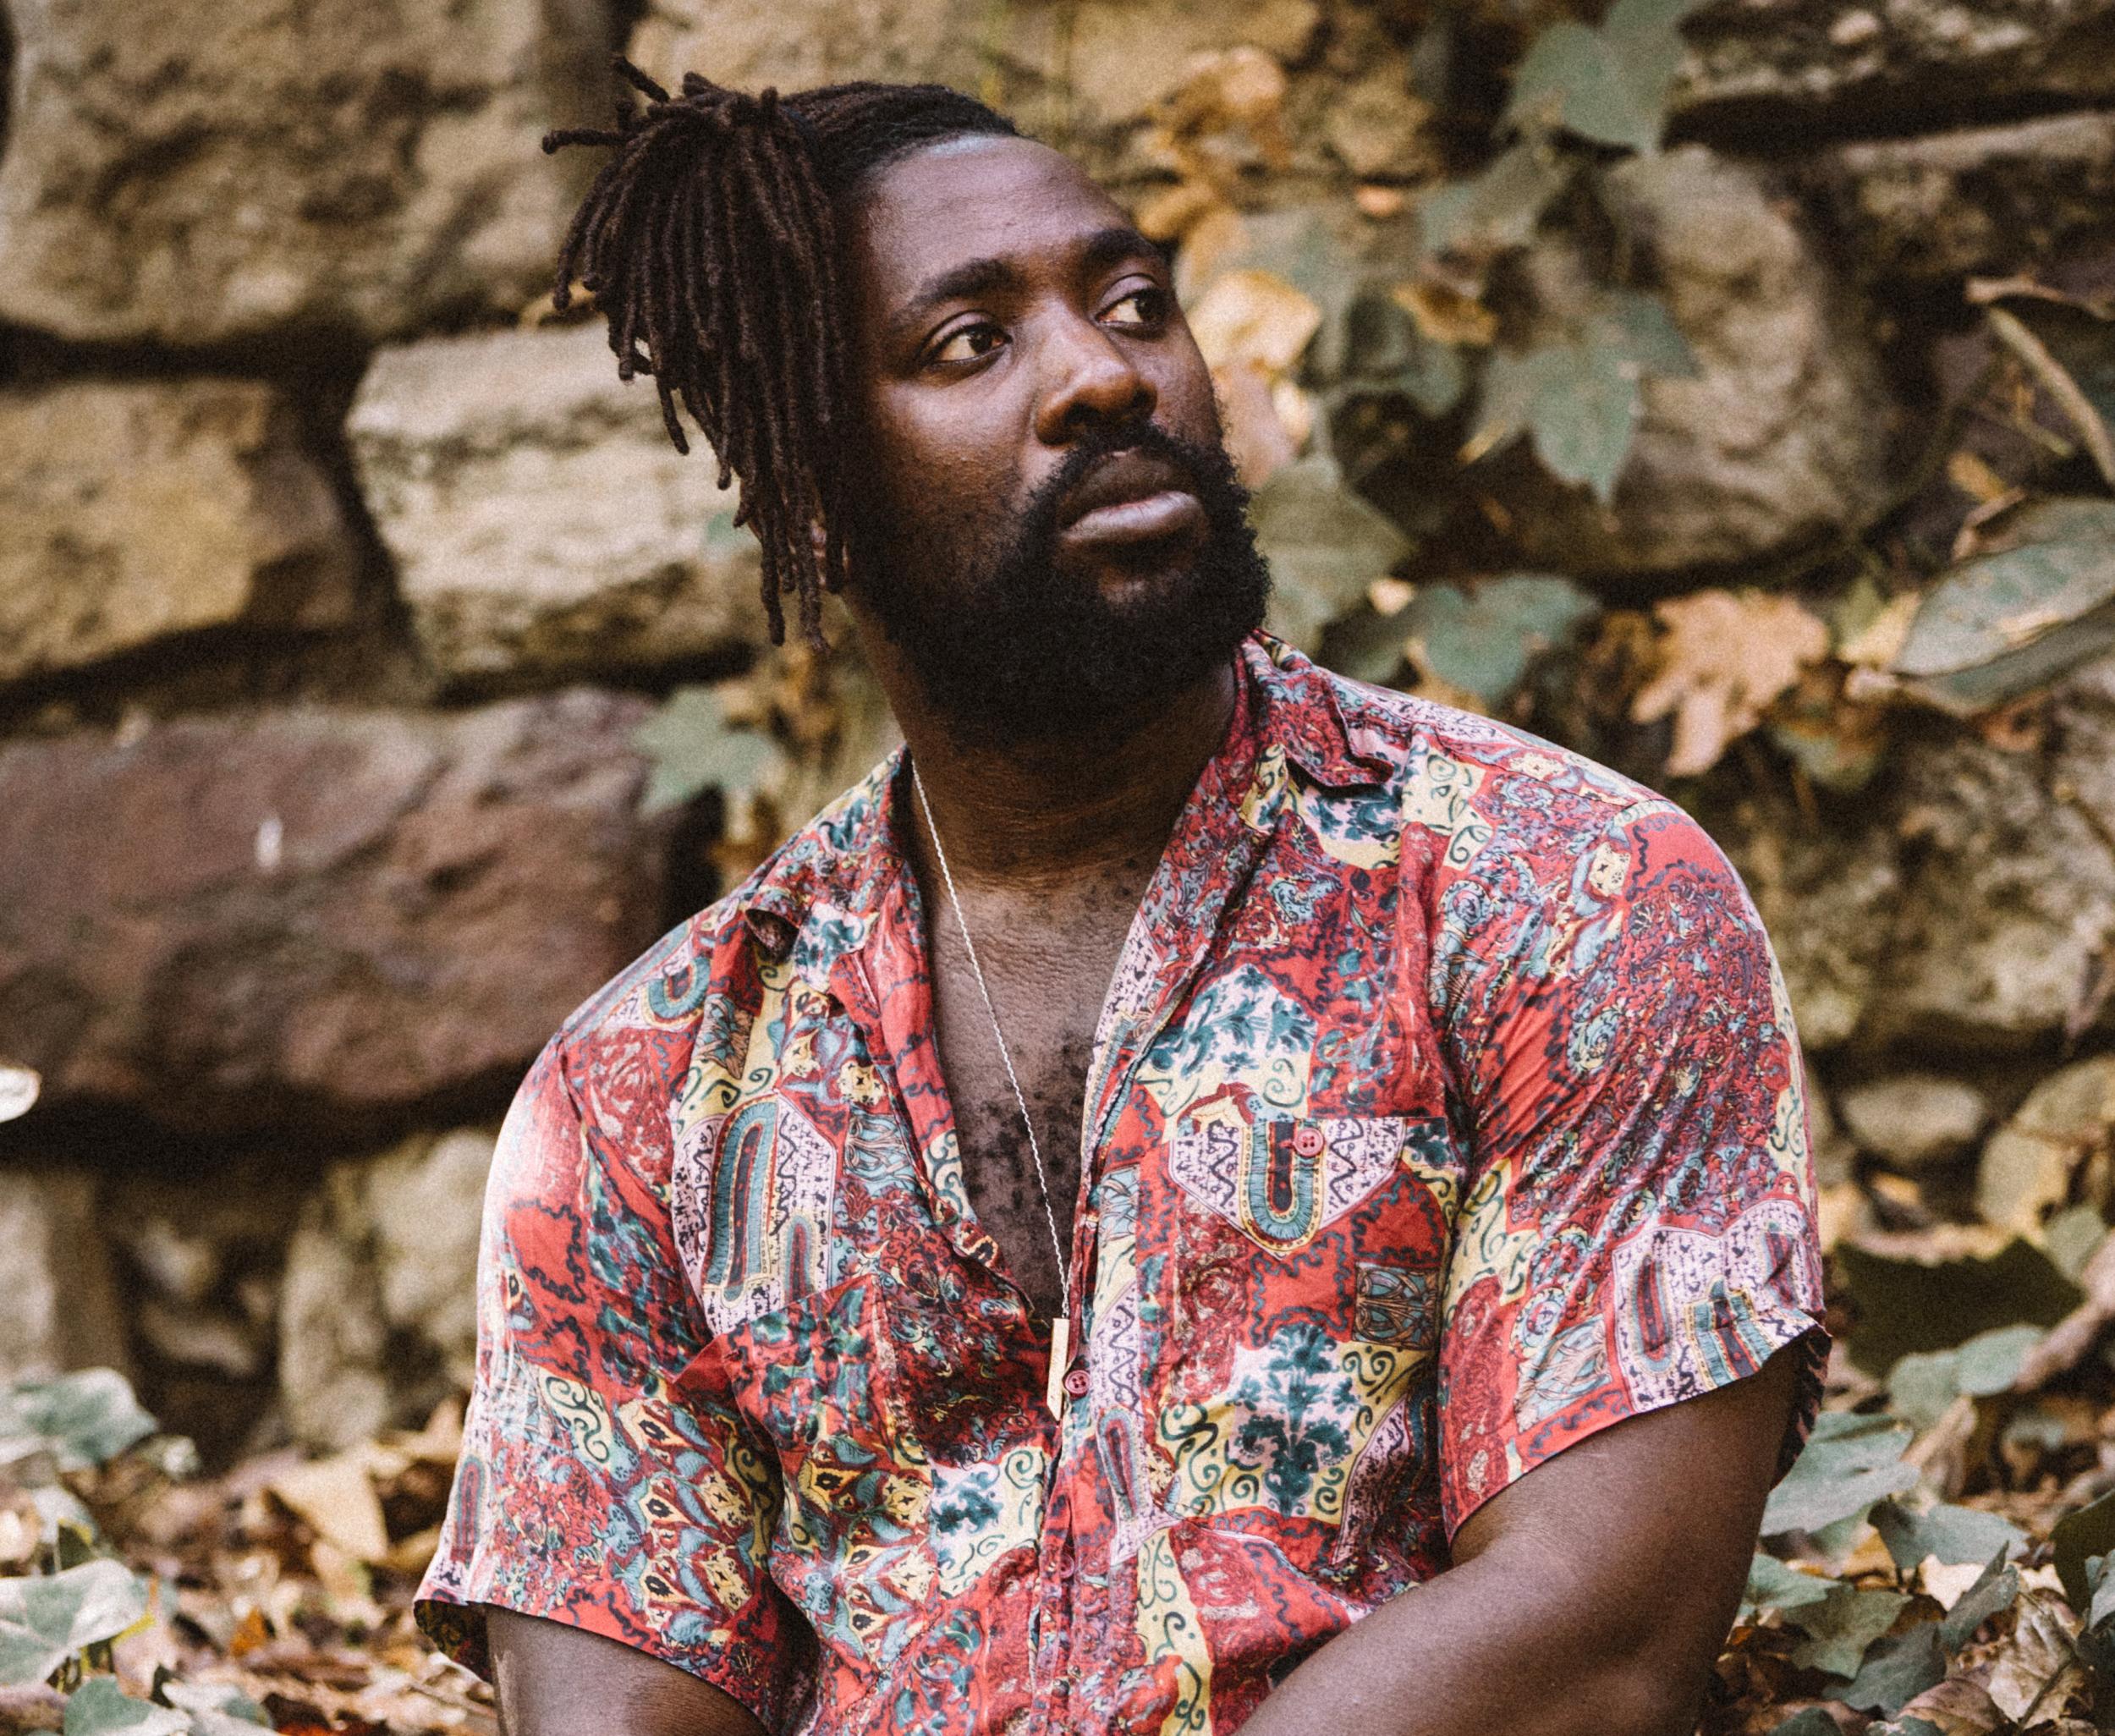 Kele Okereke: ‘In my social circles, Brexit is a reality for people. The uncertainty is real and it’s frightening’